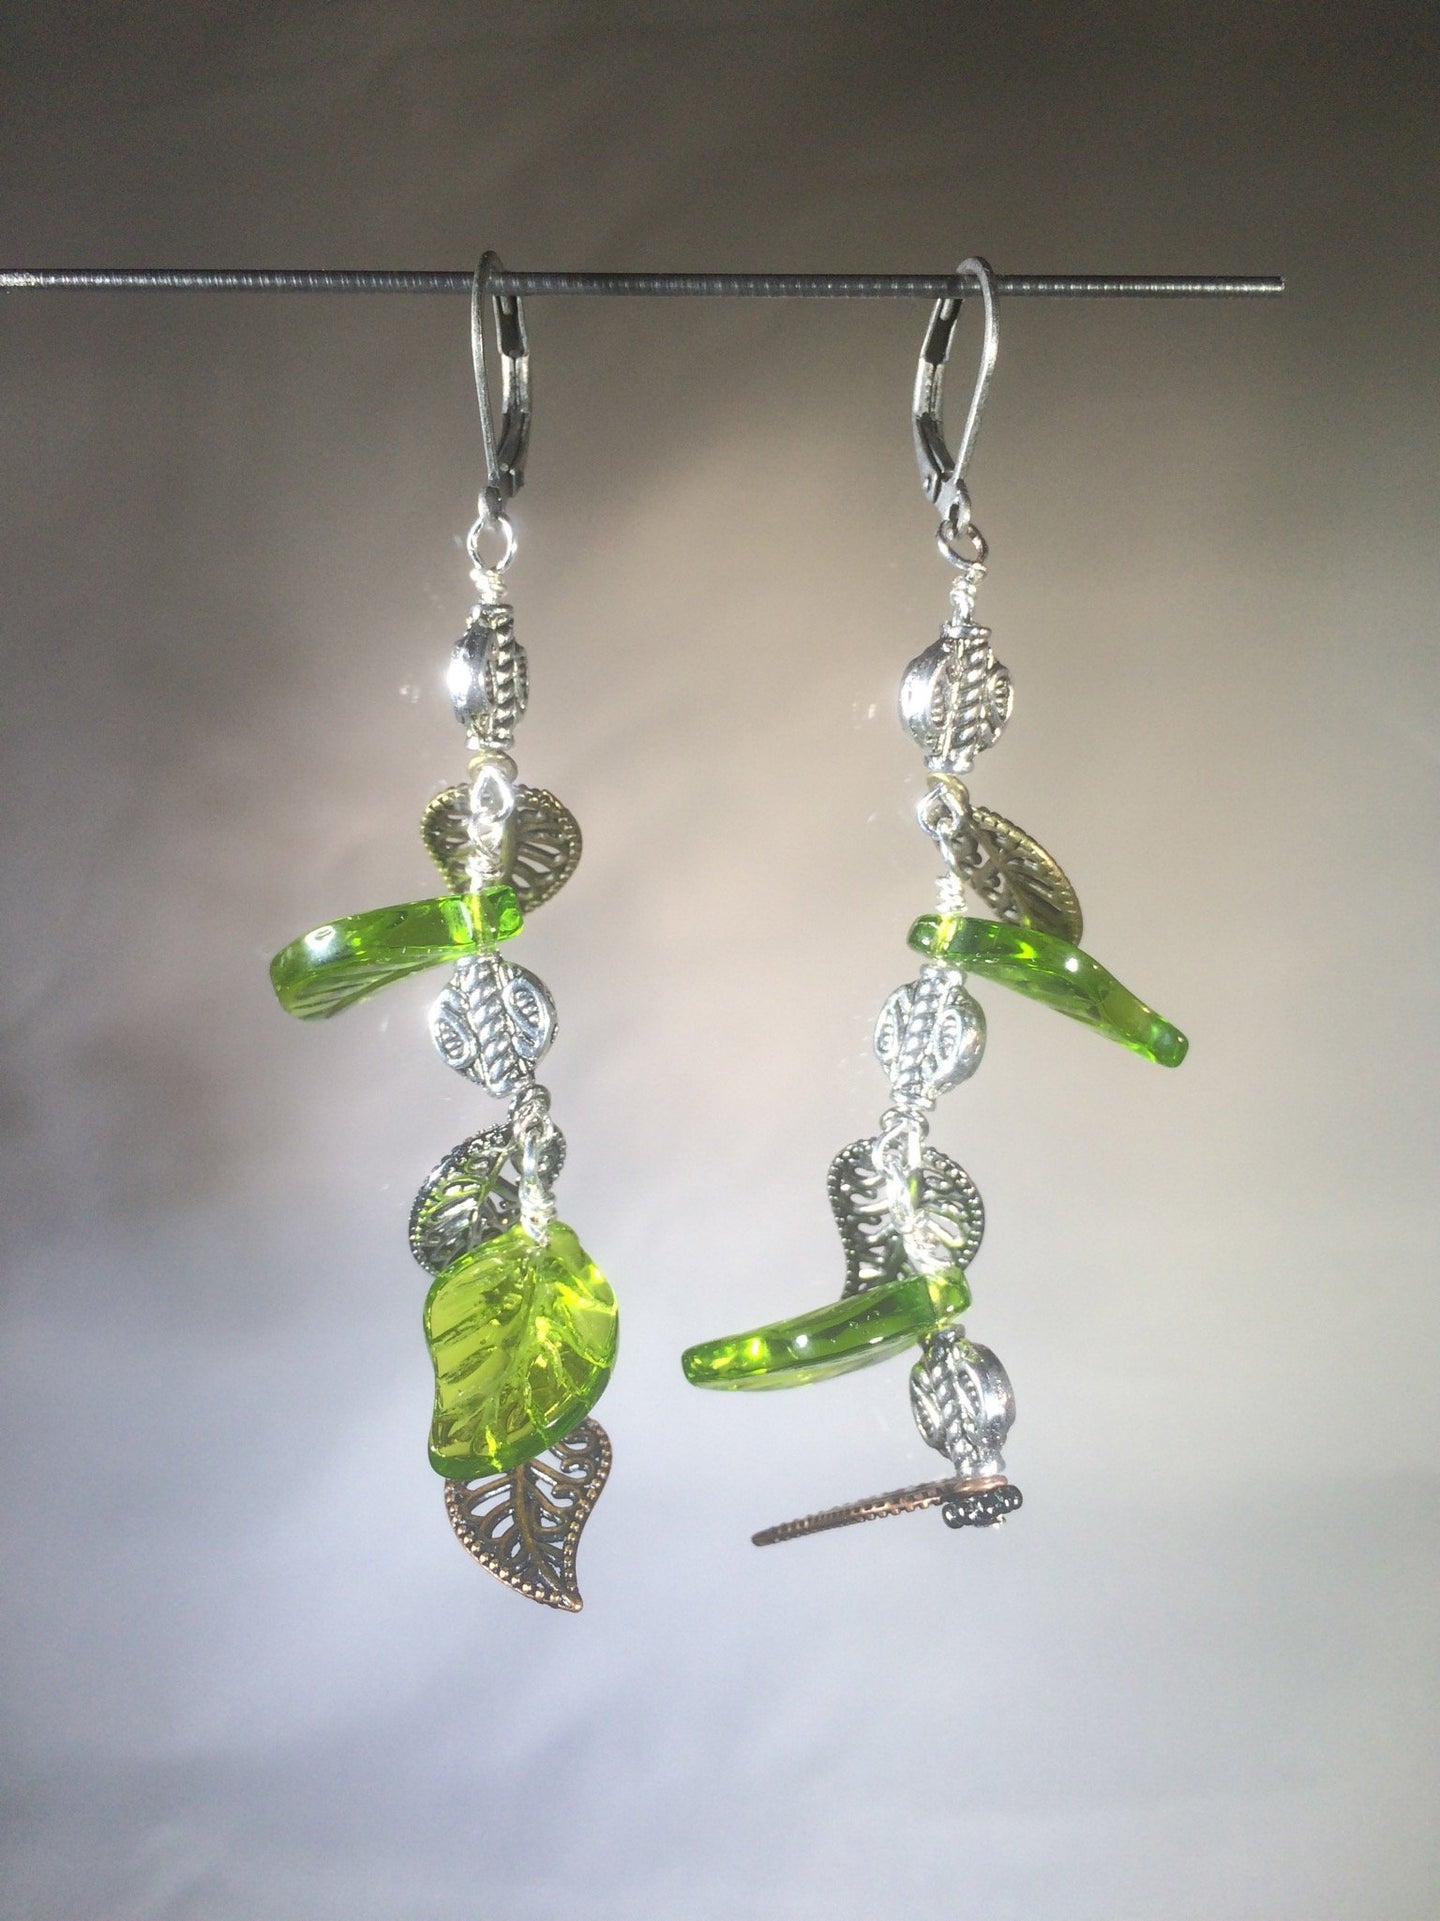 A mixture of vivid green Czech pressed glass leaves and metal leaf charms and beads dangle to the side on these 2